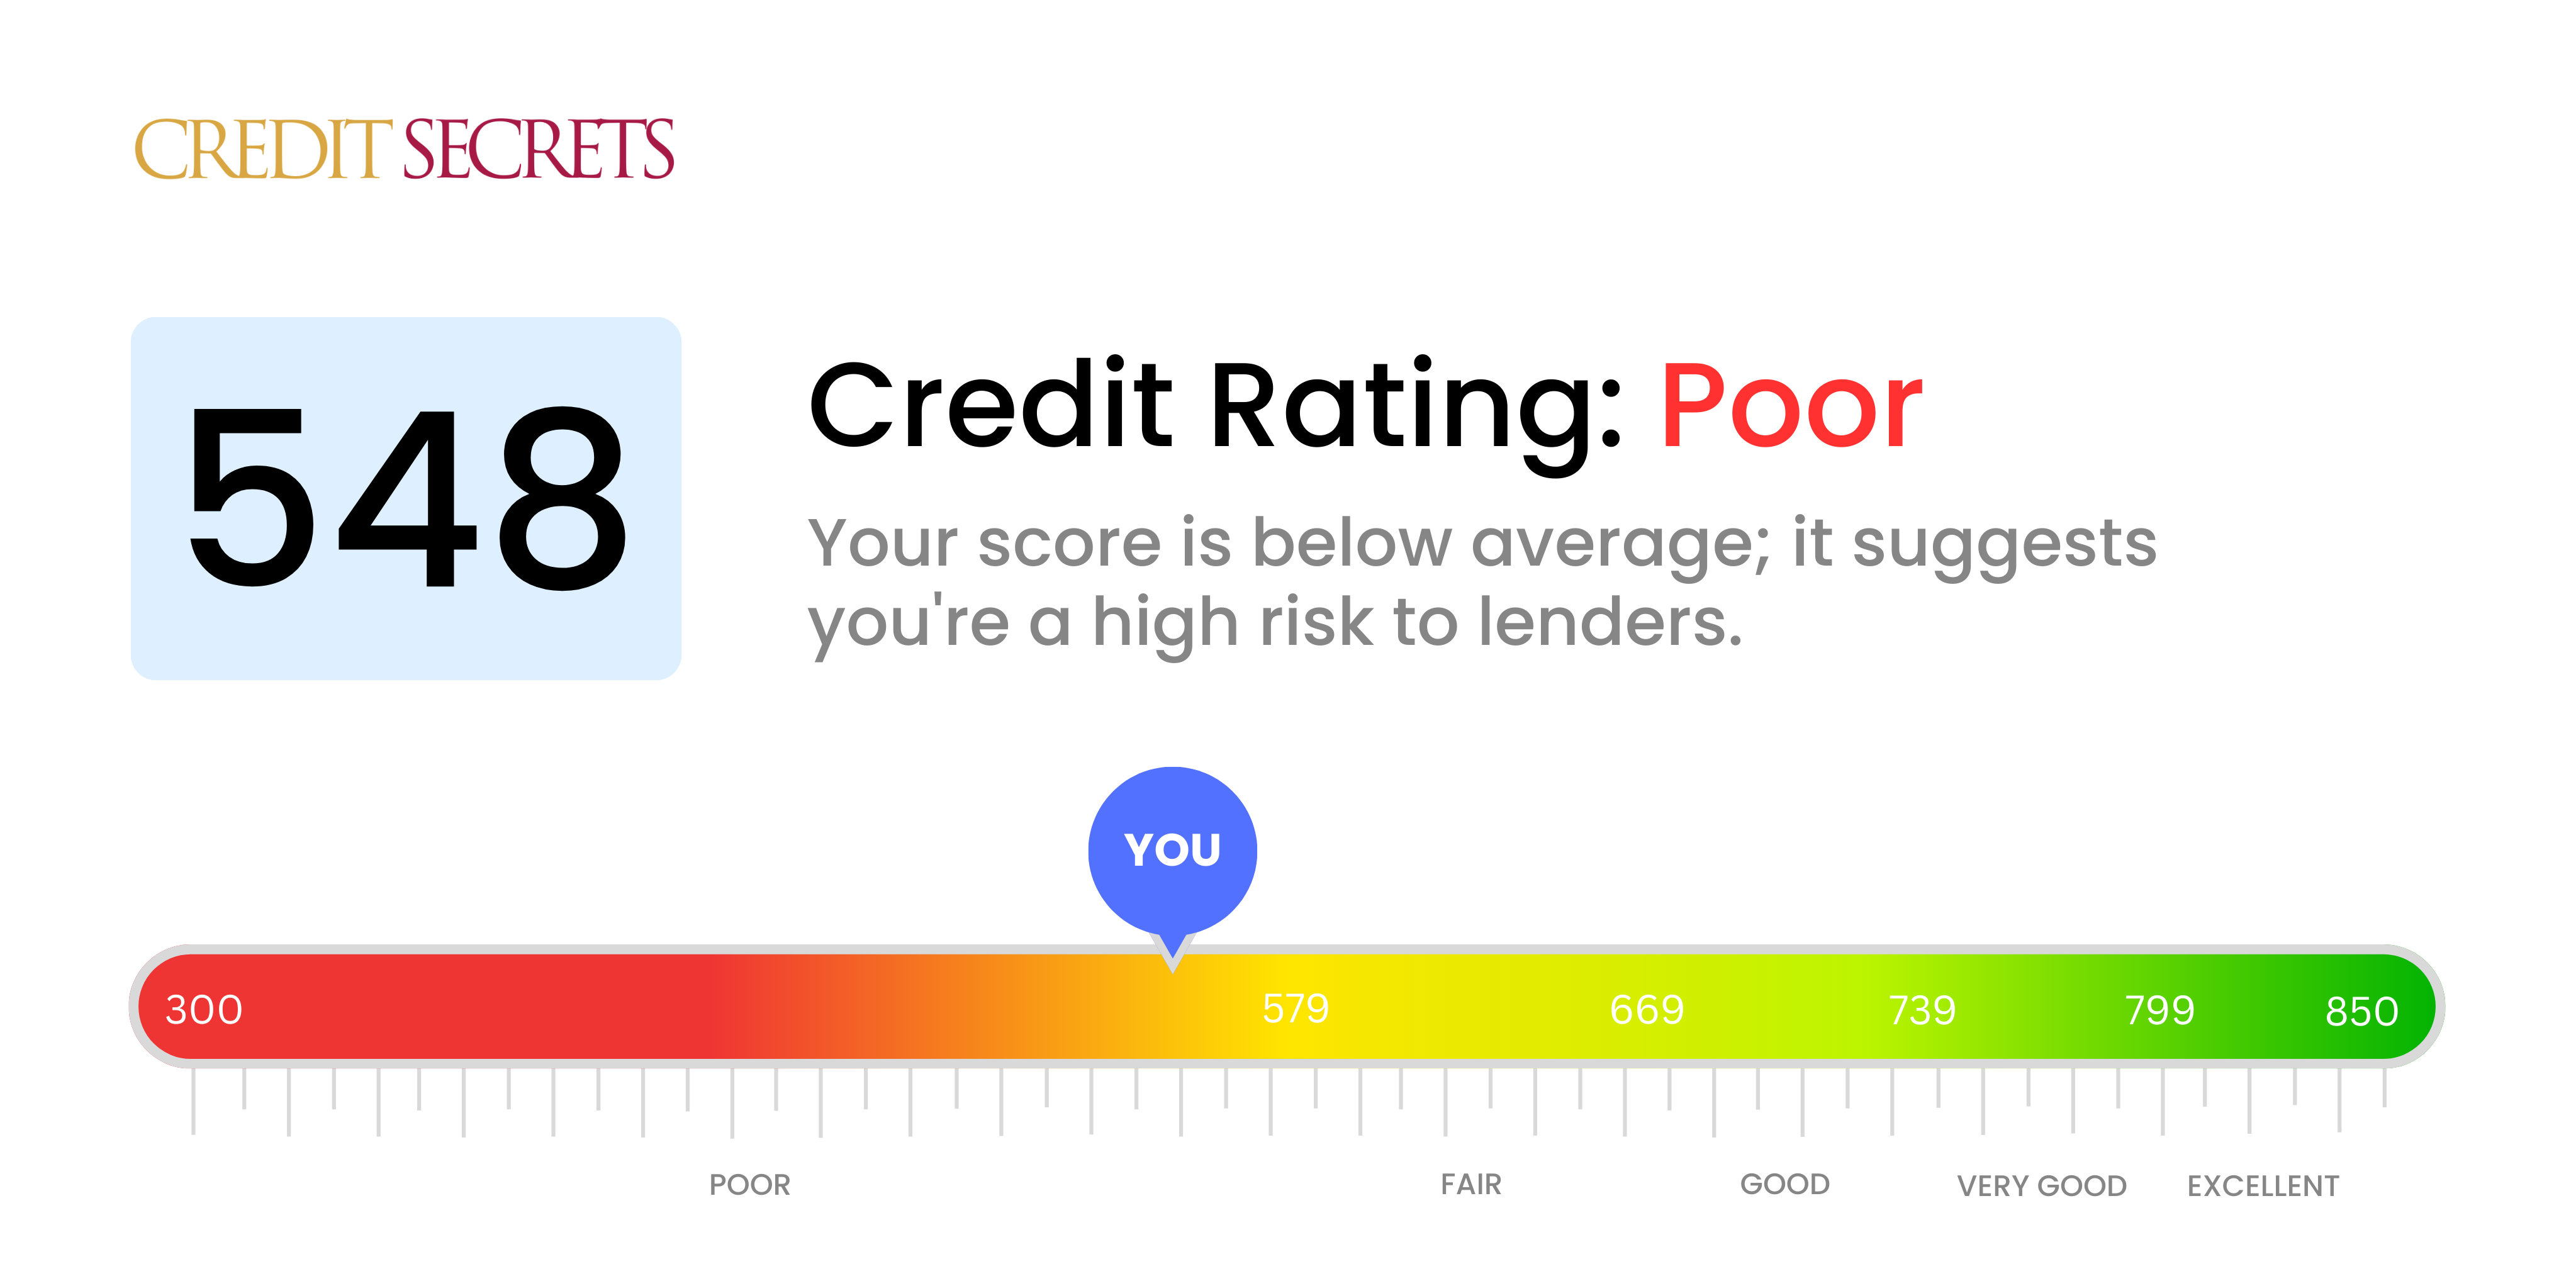 Is 548 a good credit score?